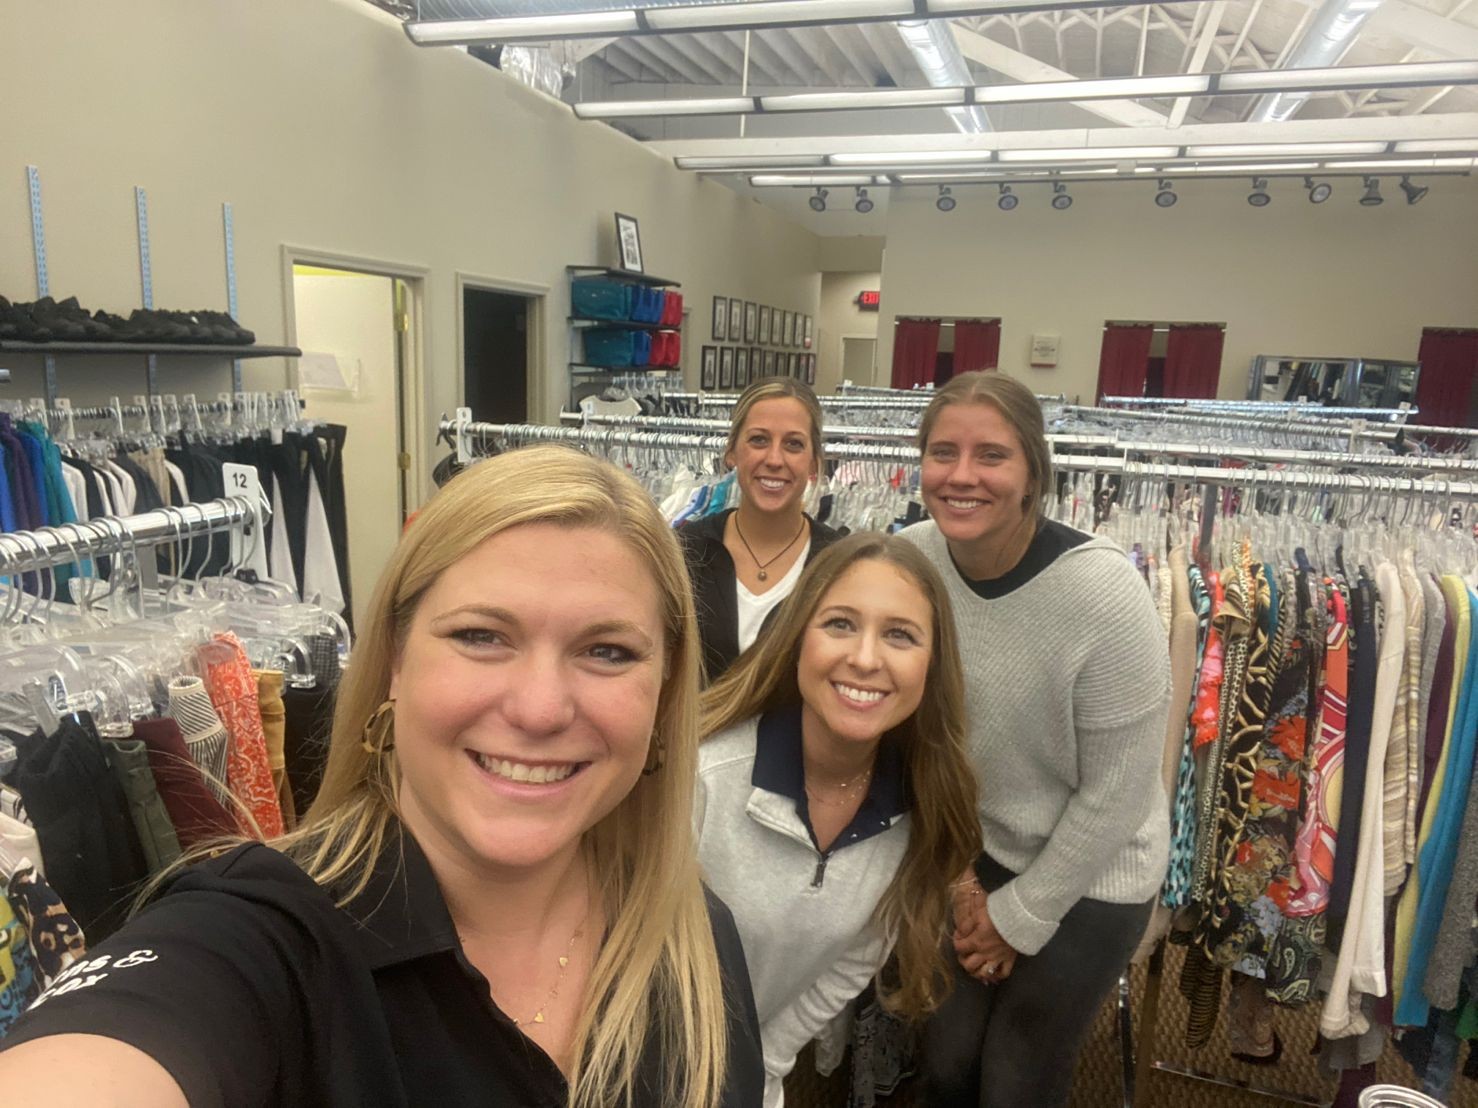 Associates taking advantage of volunteer time off to help support Dress for Success Indianapolis!